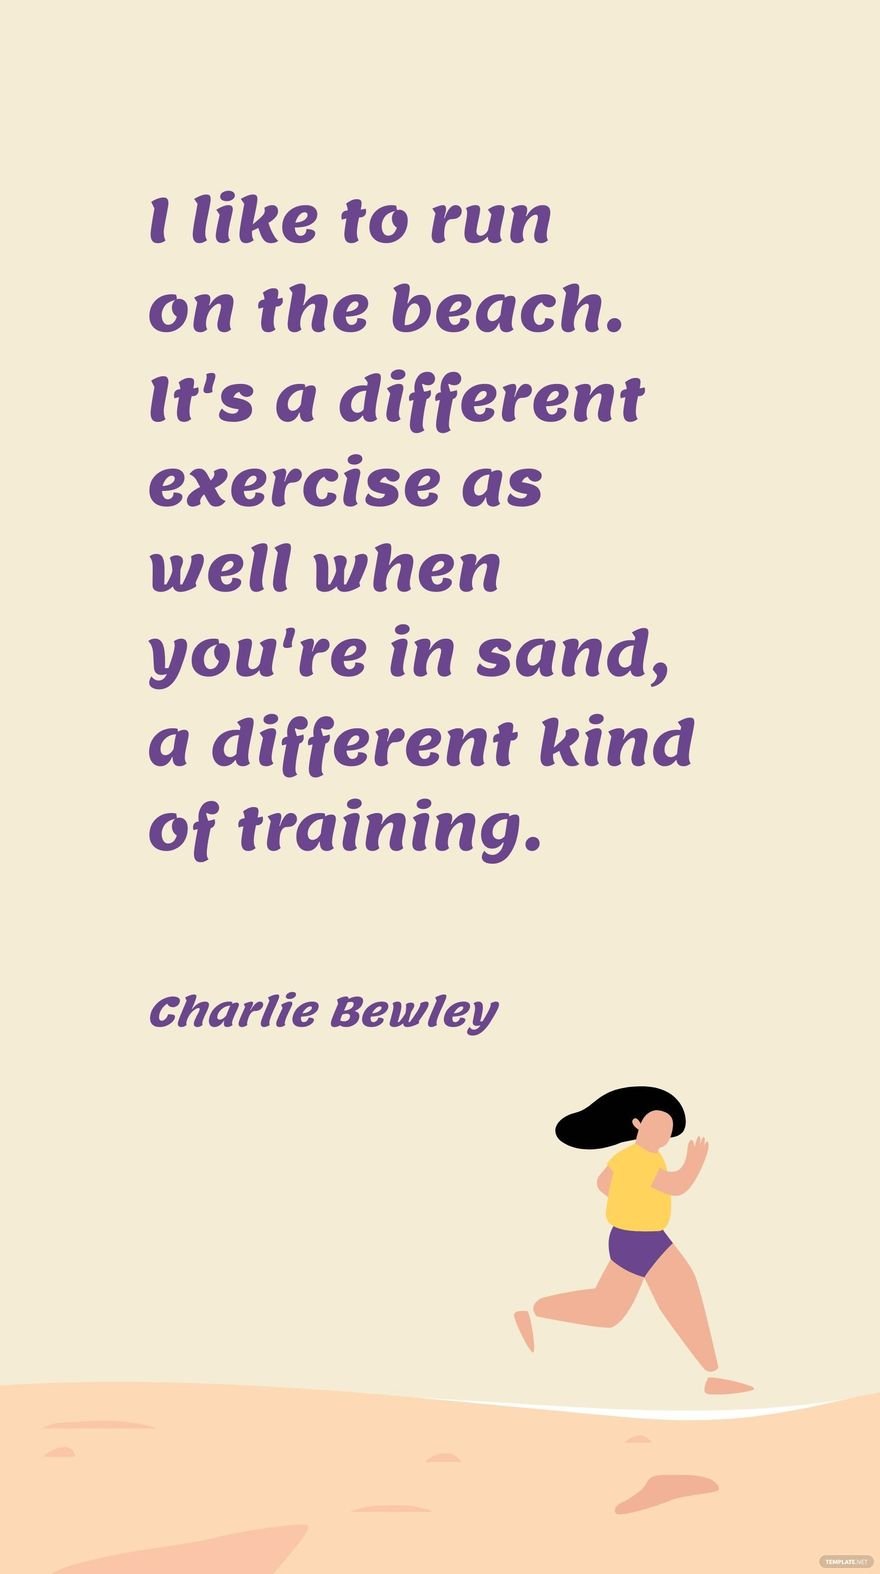 Charlie Bewley - I like to run on the beach. It's a different exercise as well when you're in sand, a different kind of training.